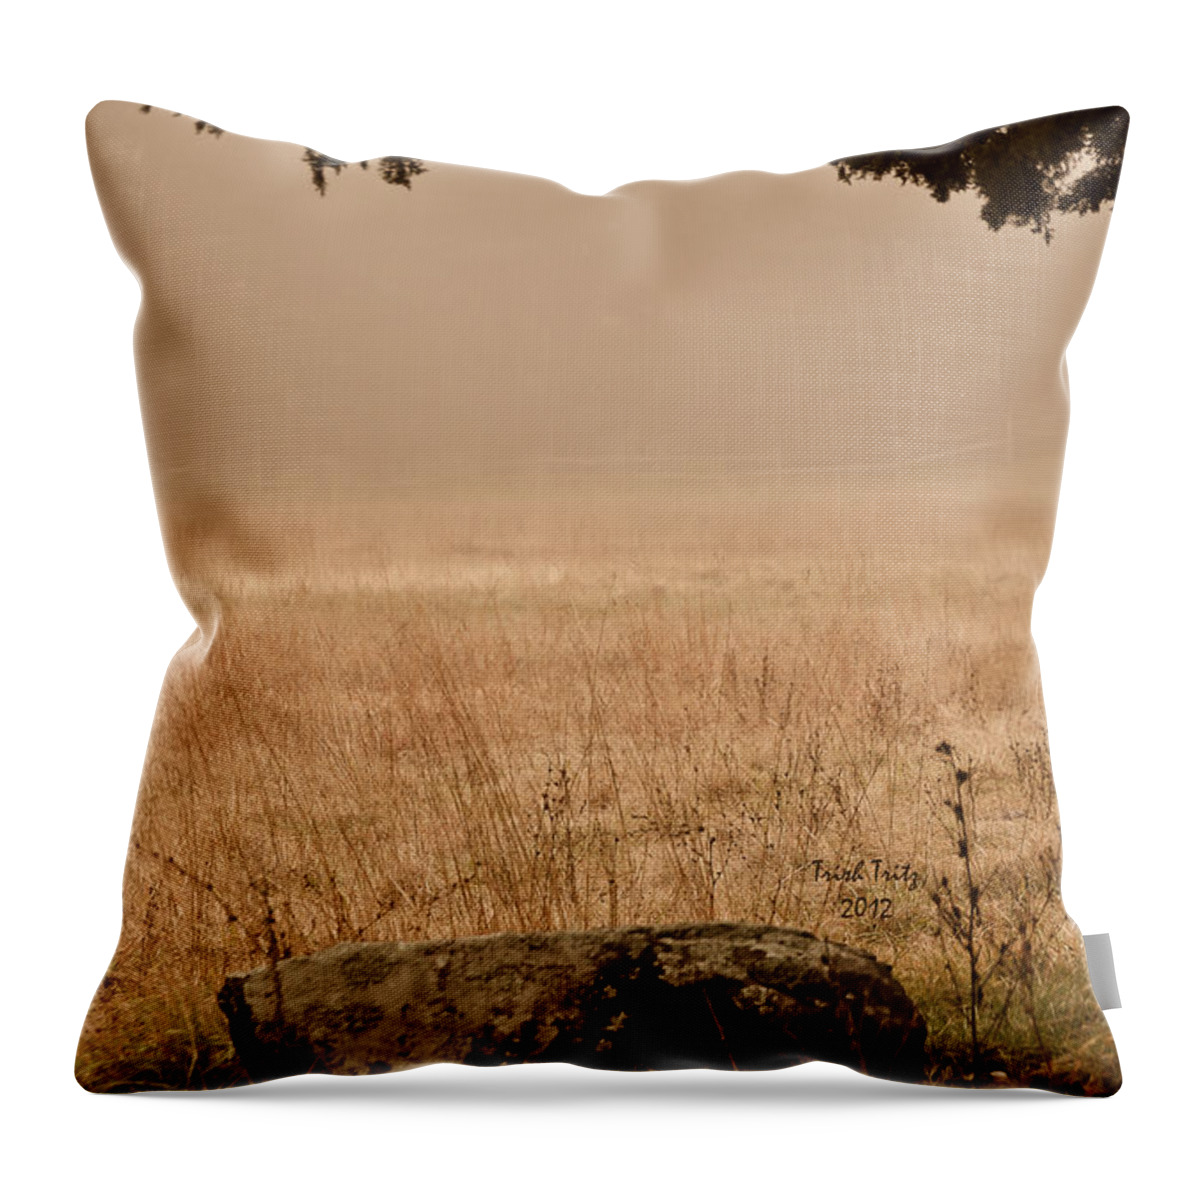 Green Lane Throw Pillow featuring the photograph Just A Rock by Trish Tritz